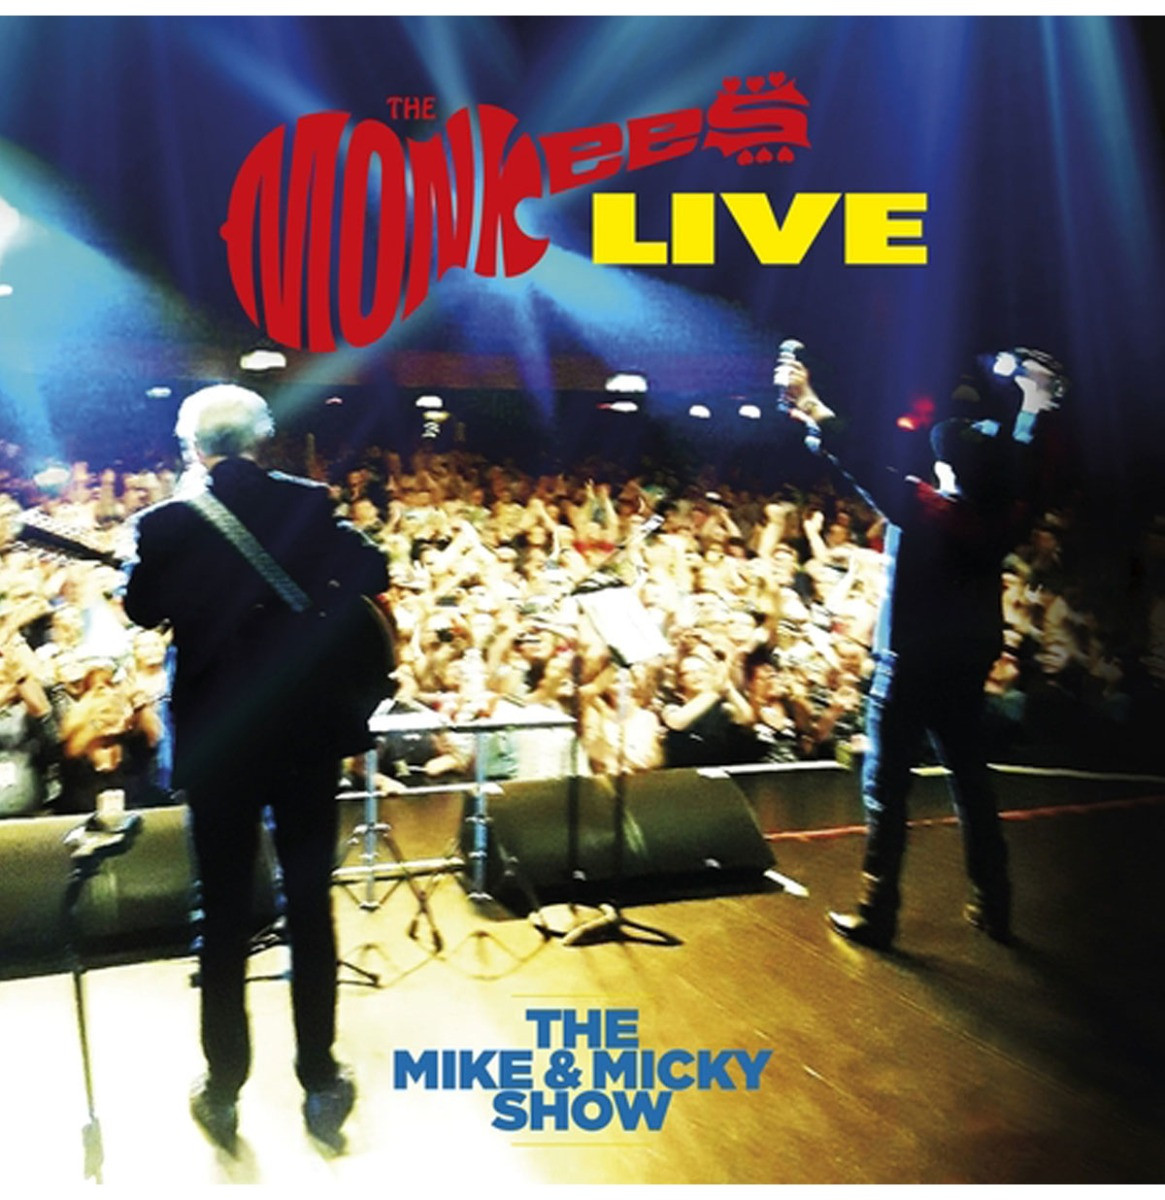 The Monkees - Live (The Mike & Micky Show) 2LP